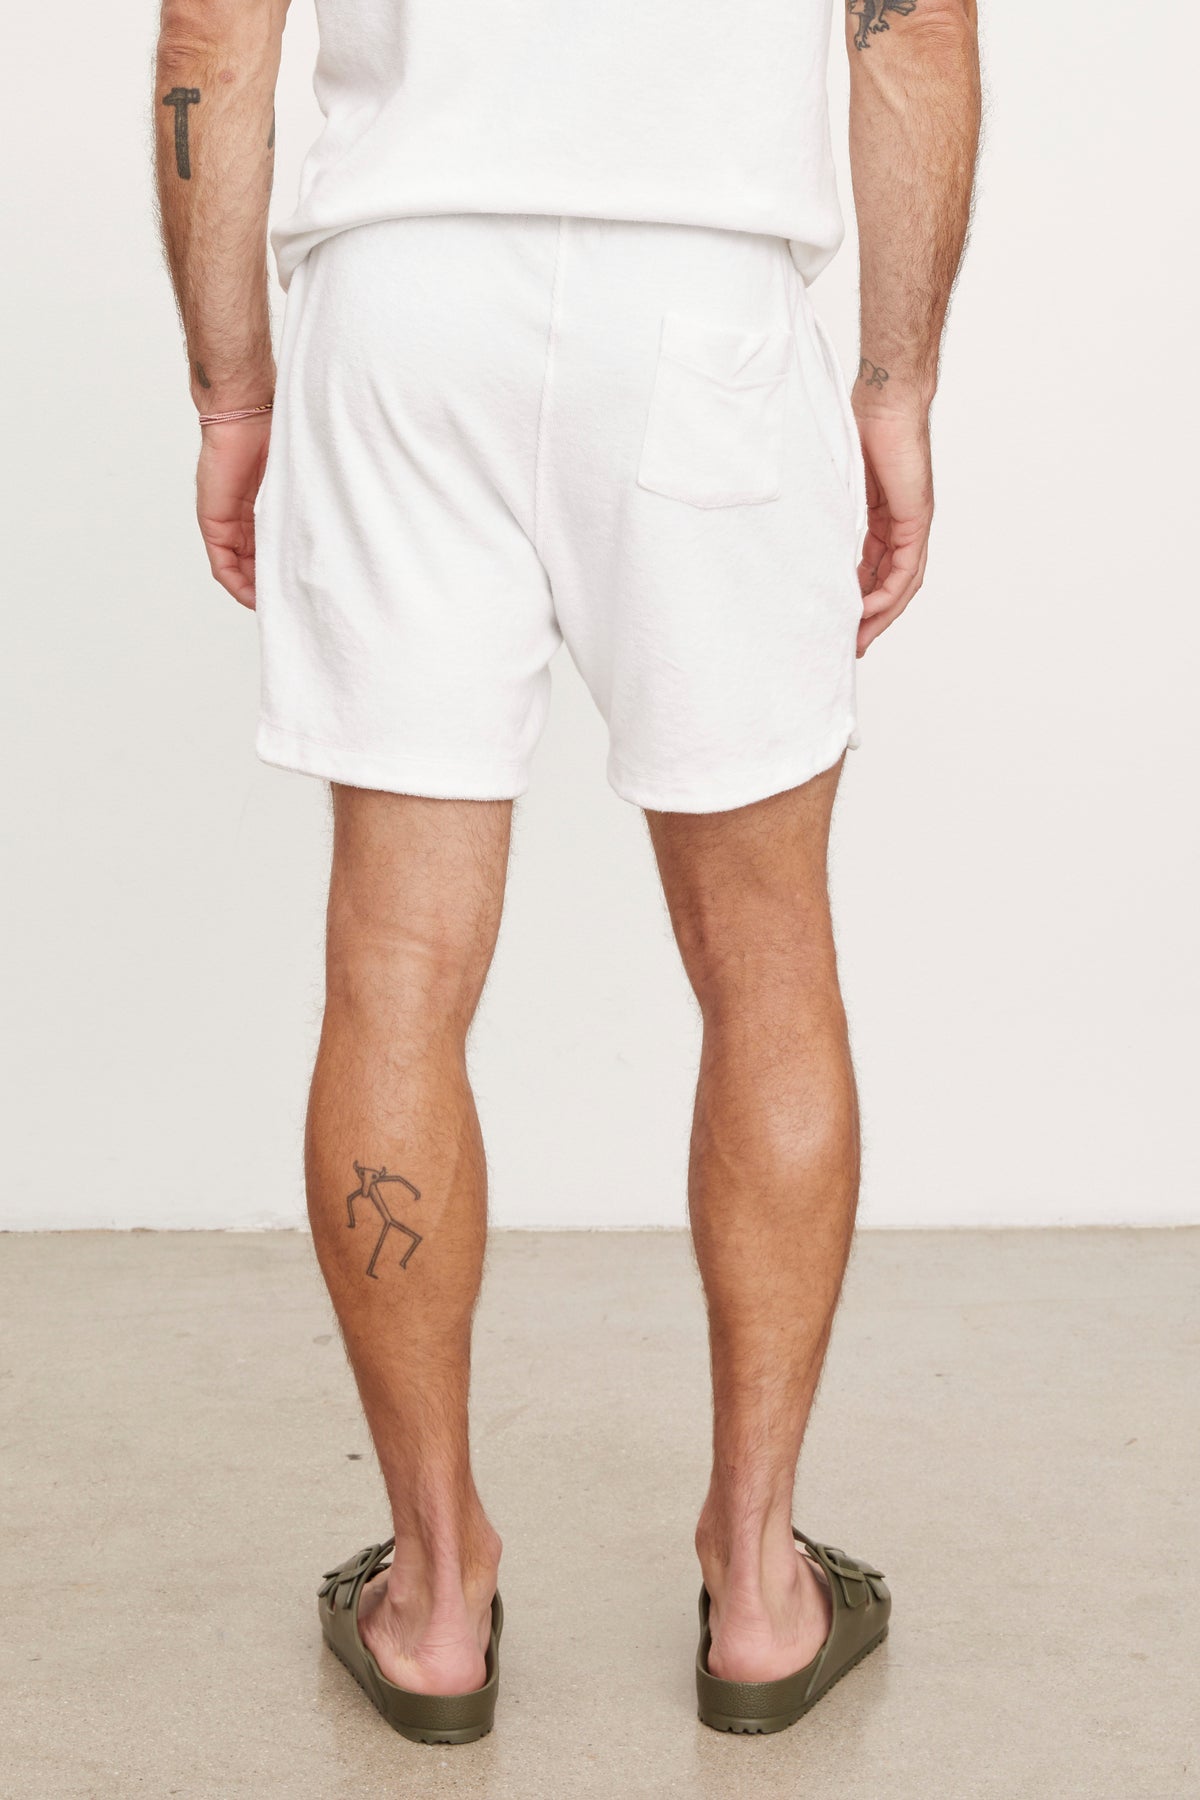 Man standing in white cotton terry cloth SALEM SHORTS by Velvet by Graham & Spencer with a back view, showcasing a tattoo on his left calf and wearing green flip-flops.-36943667888321